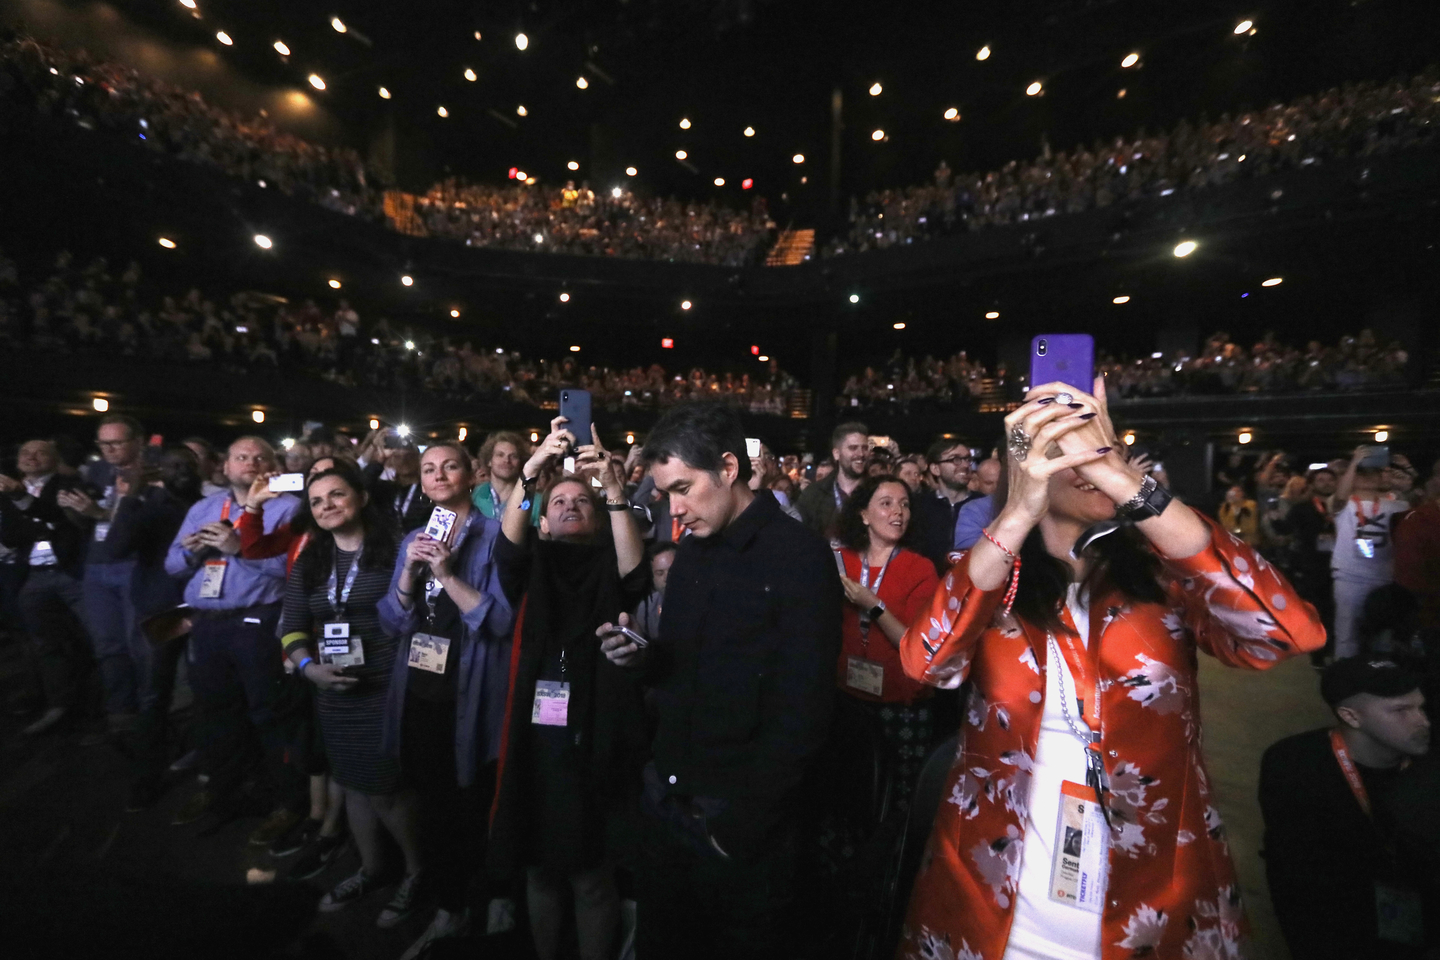 A view of the audience for “Elon Musk Answers Your Questions!” at ACL Live. Photo by Diego Donamaria/Getty Images for SXSW